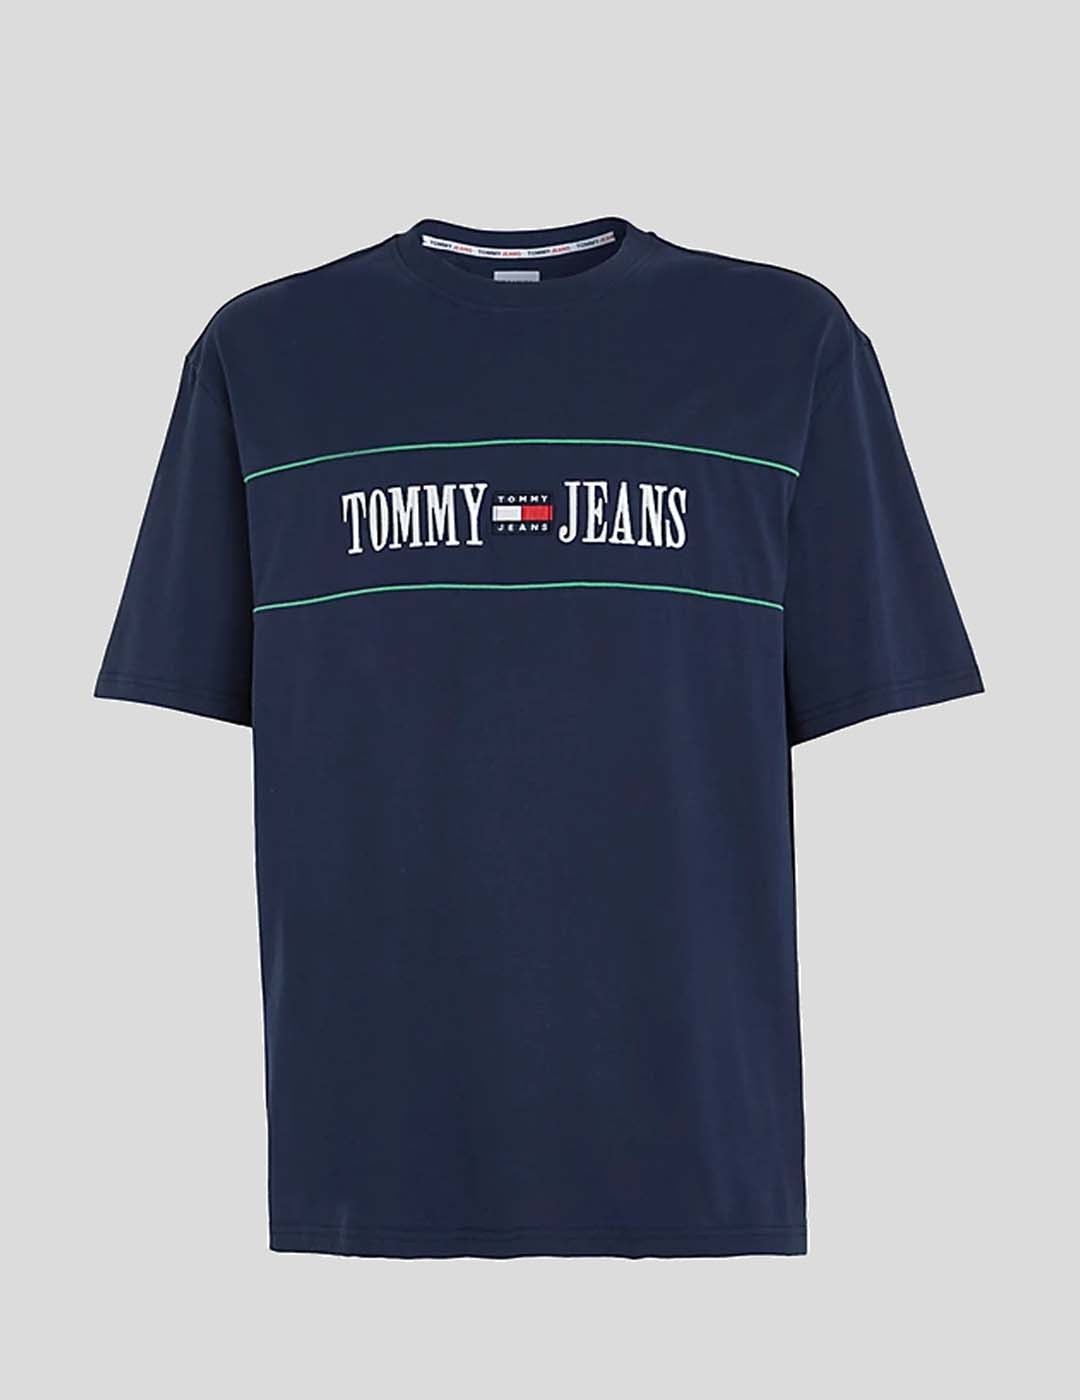 CAMISETA TOMMY JEANS SKATE ARCHIVE TEE  NAVY